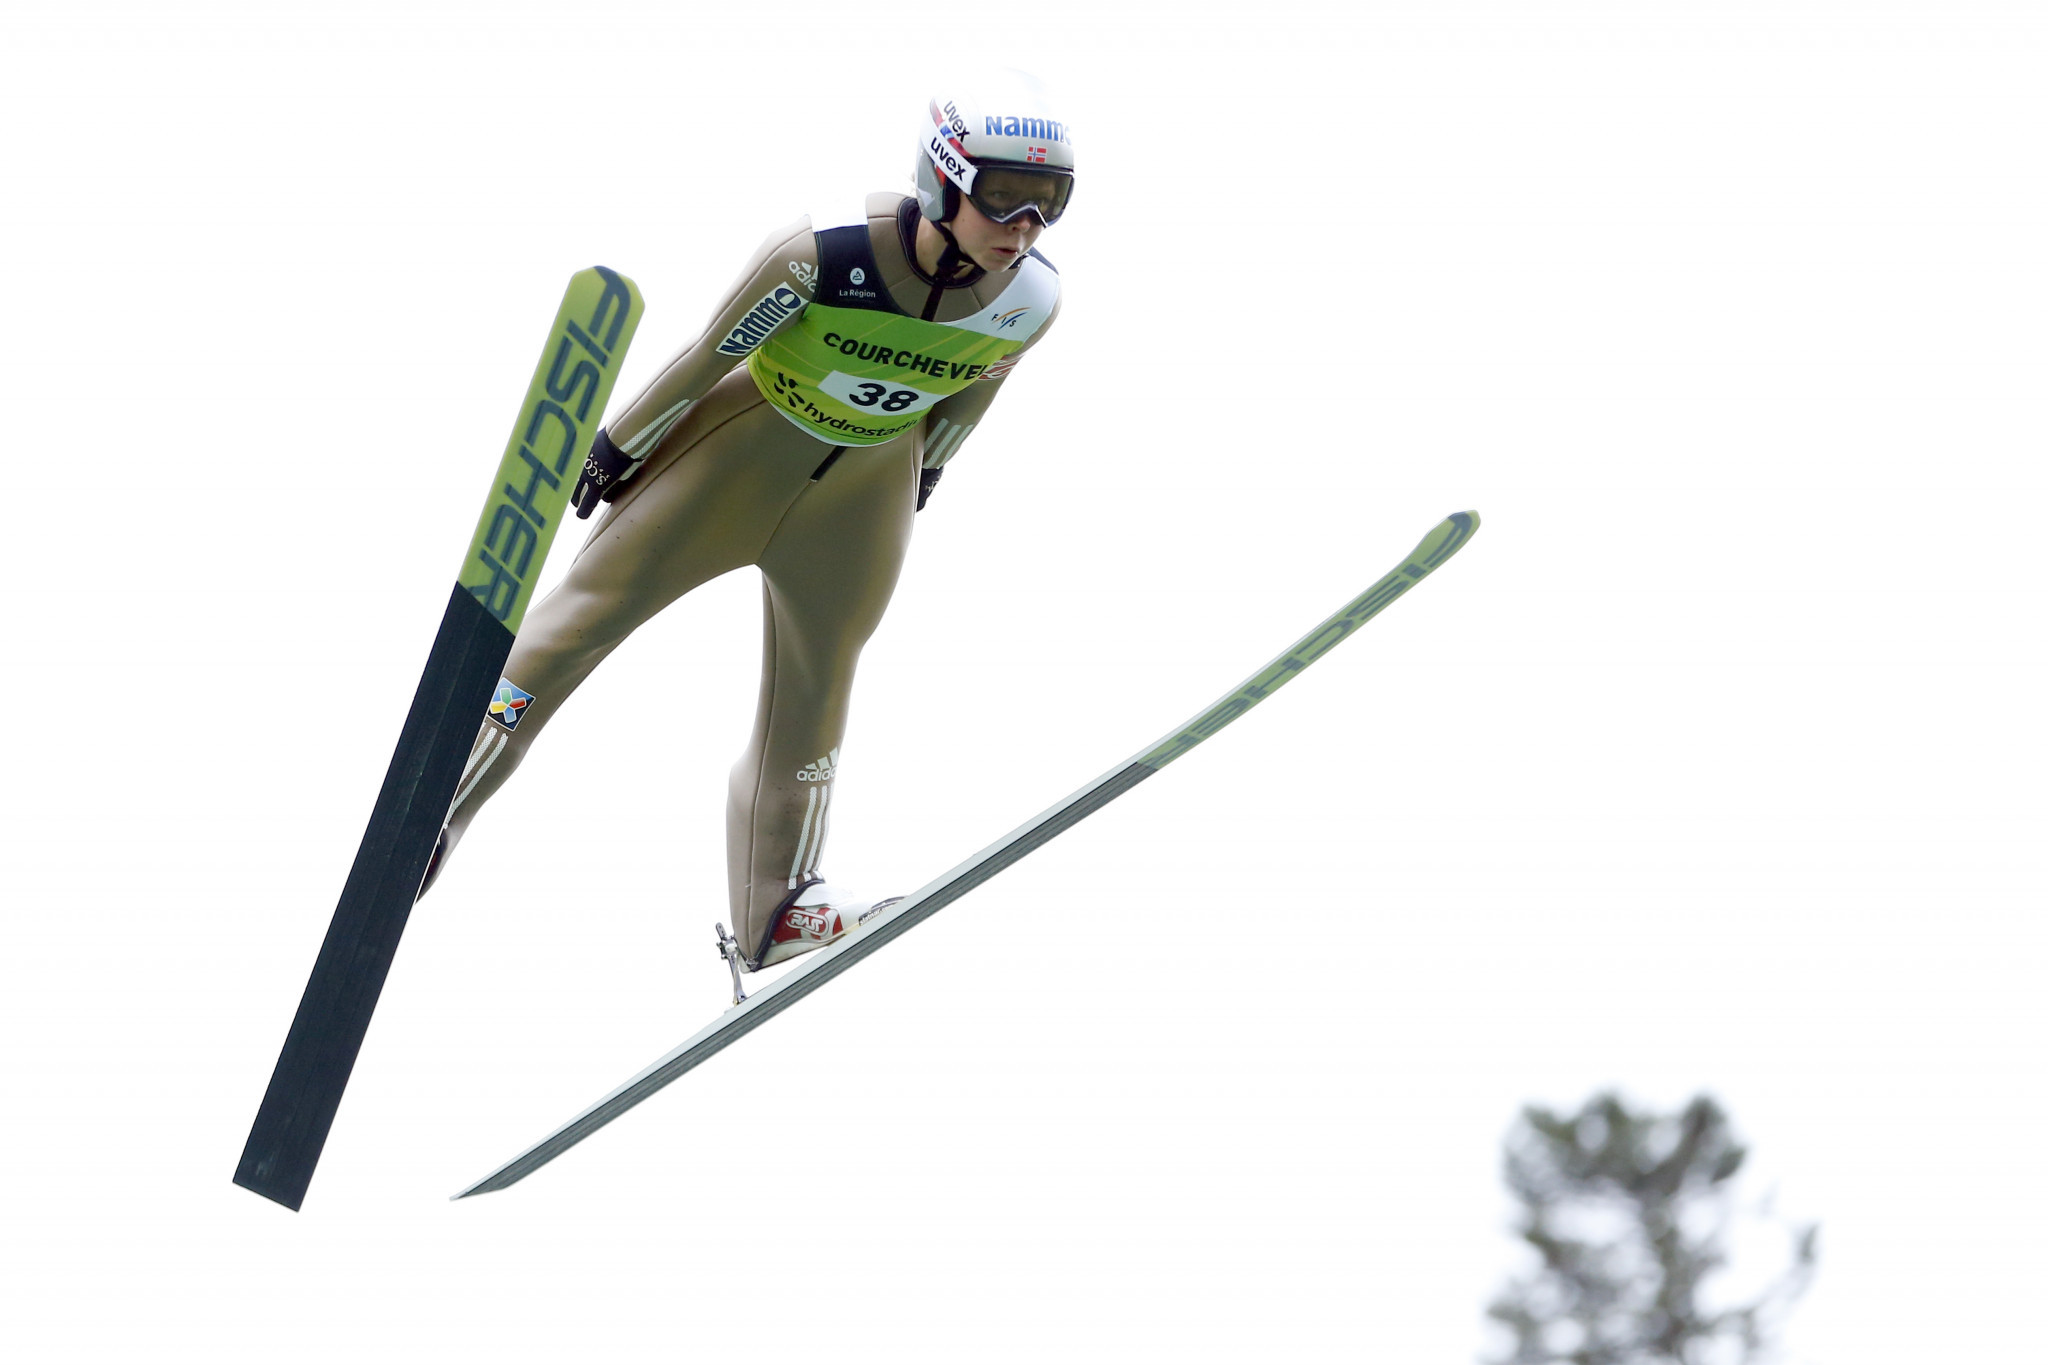 Lundby and Takanashi looking good for ski jump success after qualifying in Lillehammer